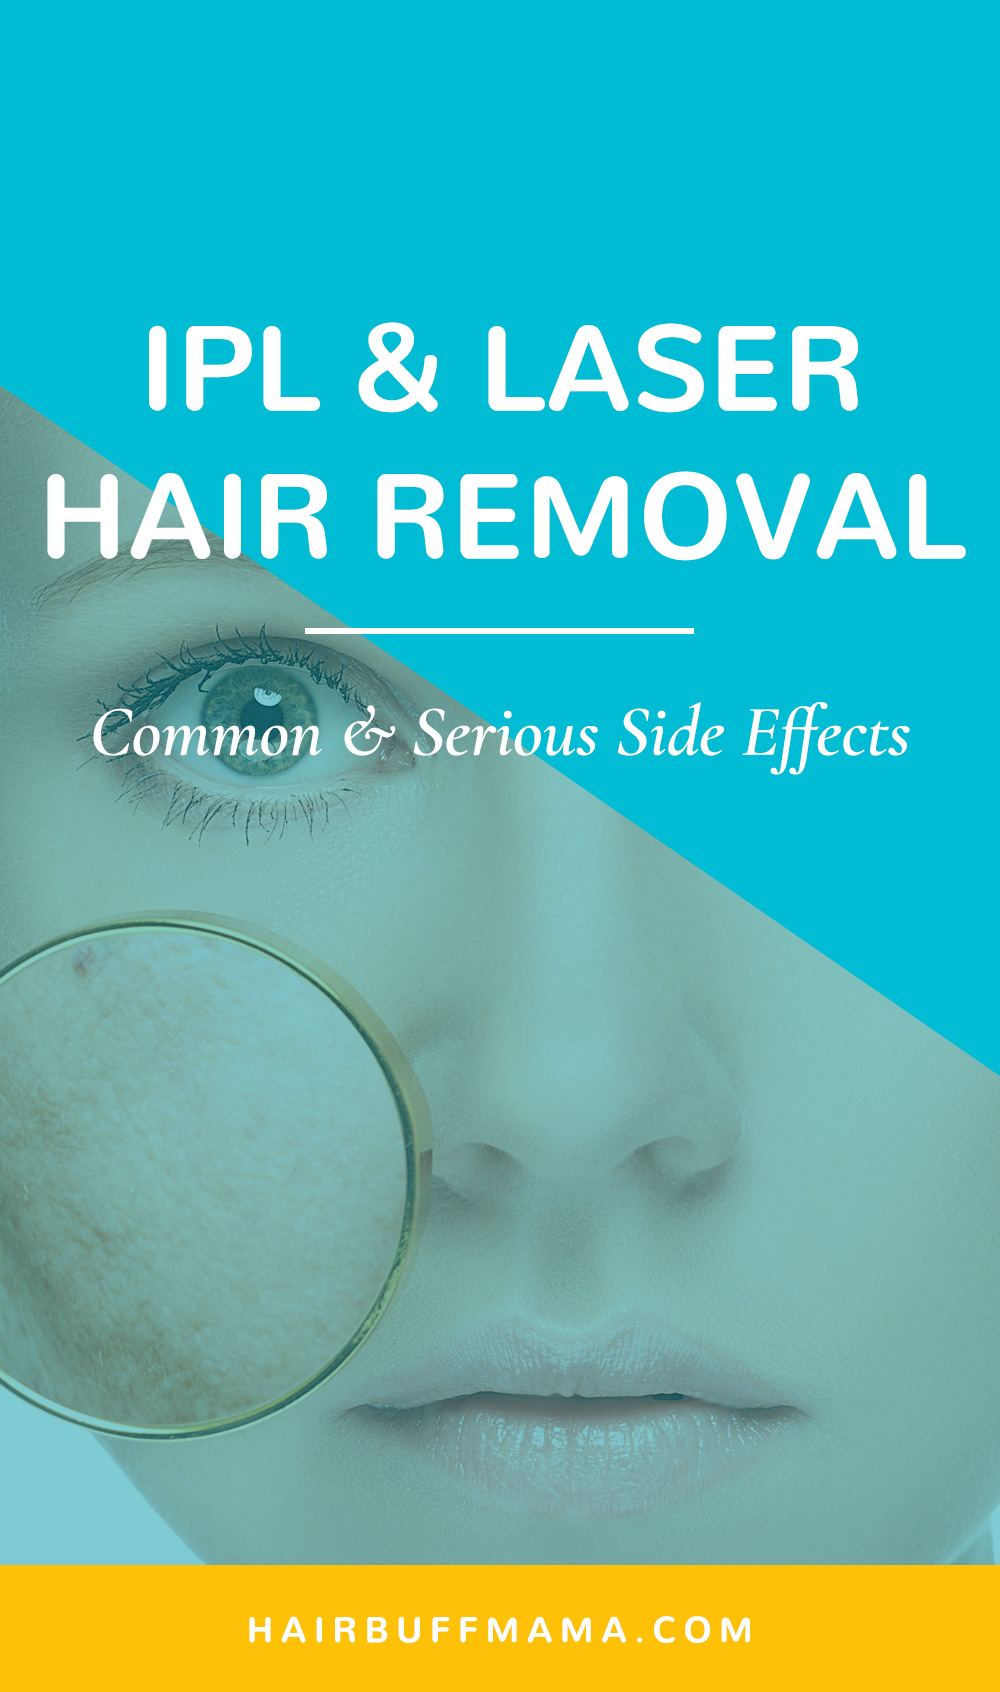 Common and Serious Side Effects of Home IPL and Laser Hair Removal Devices